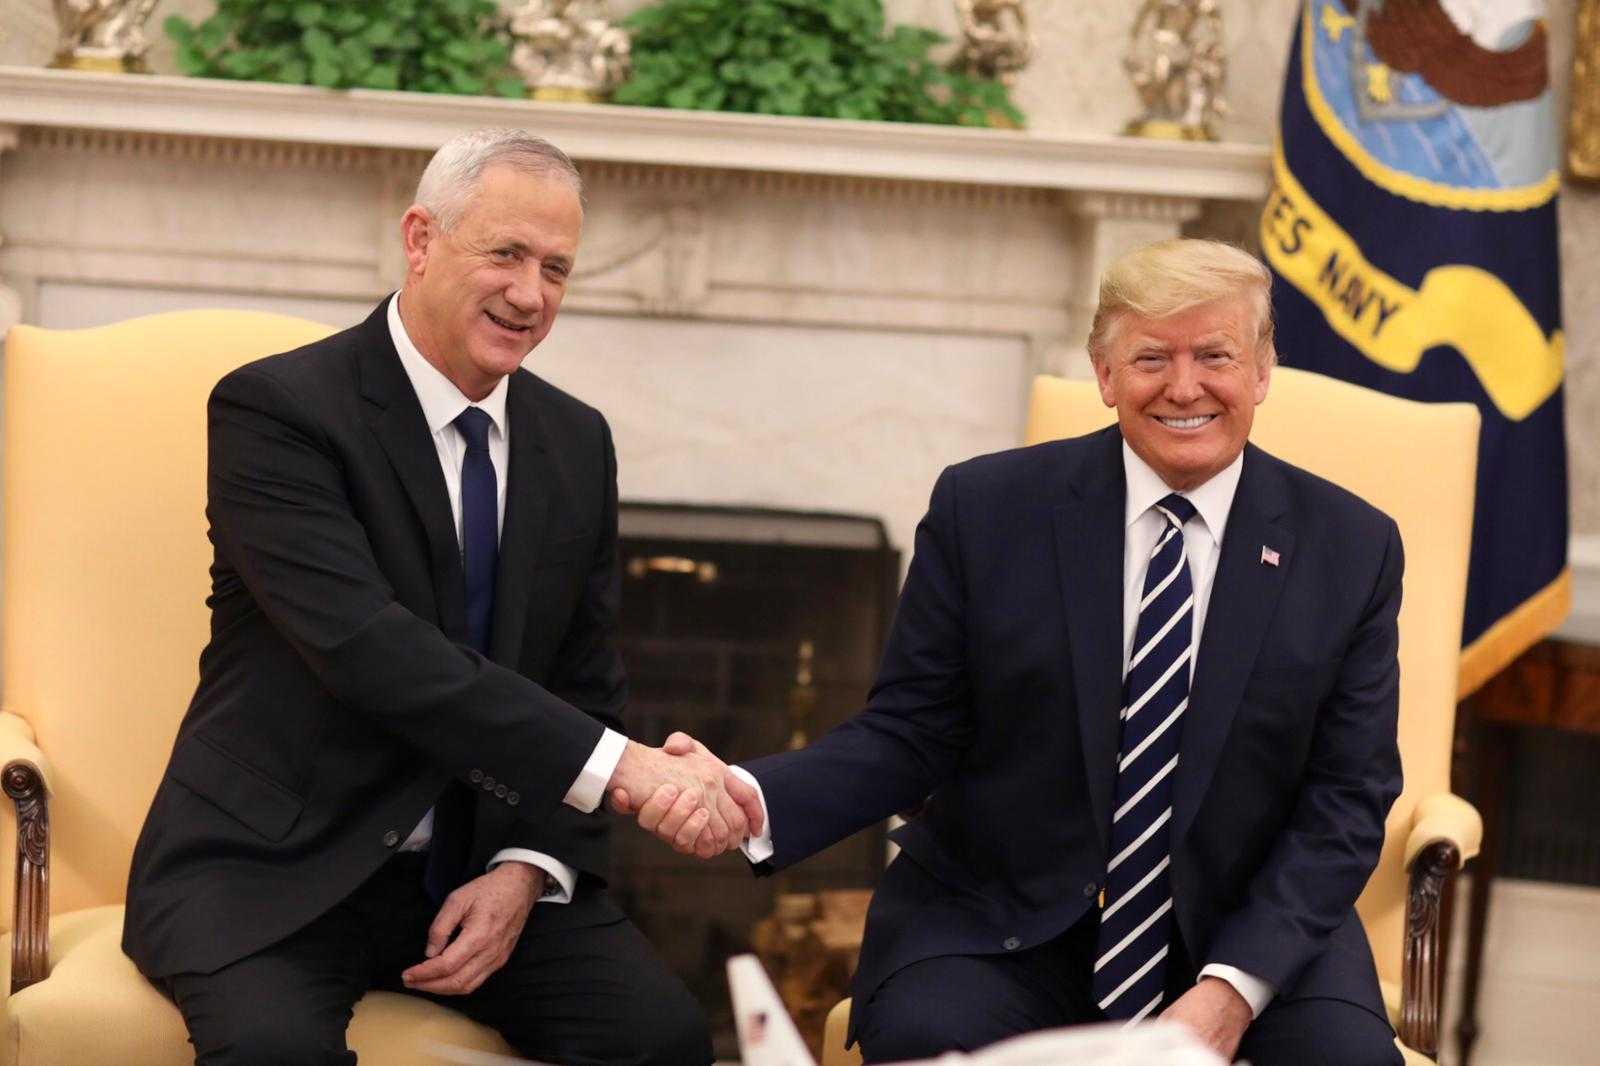 Gantz hails Trump's peace plan, says he'll work to implement it after elections | The Times of Israel